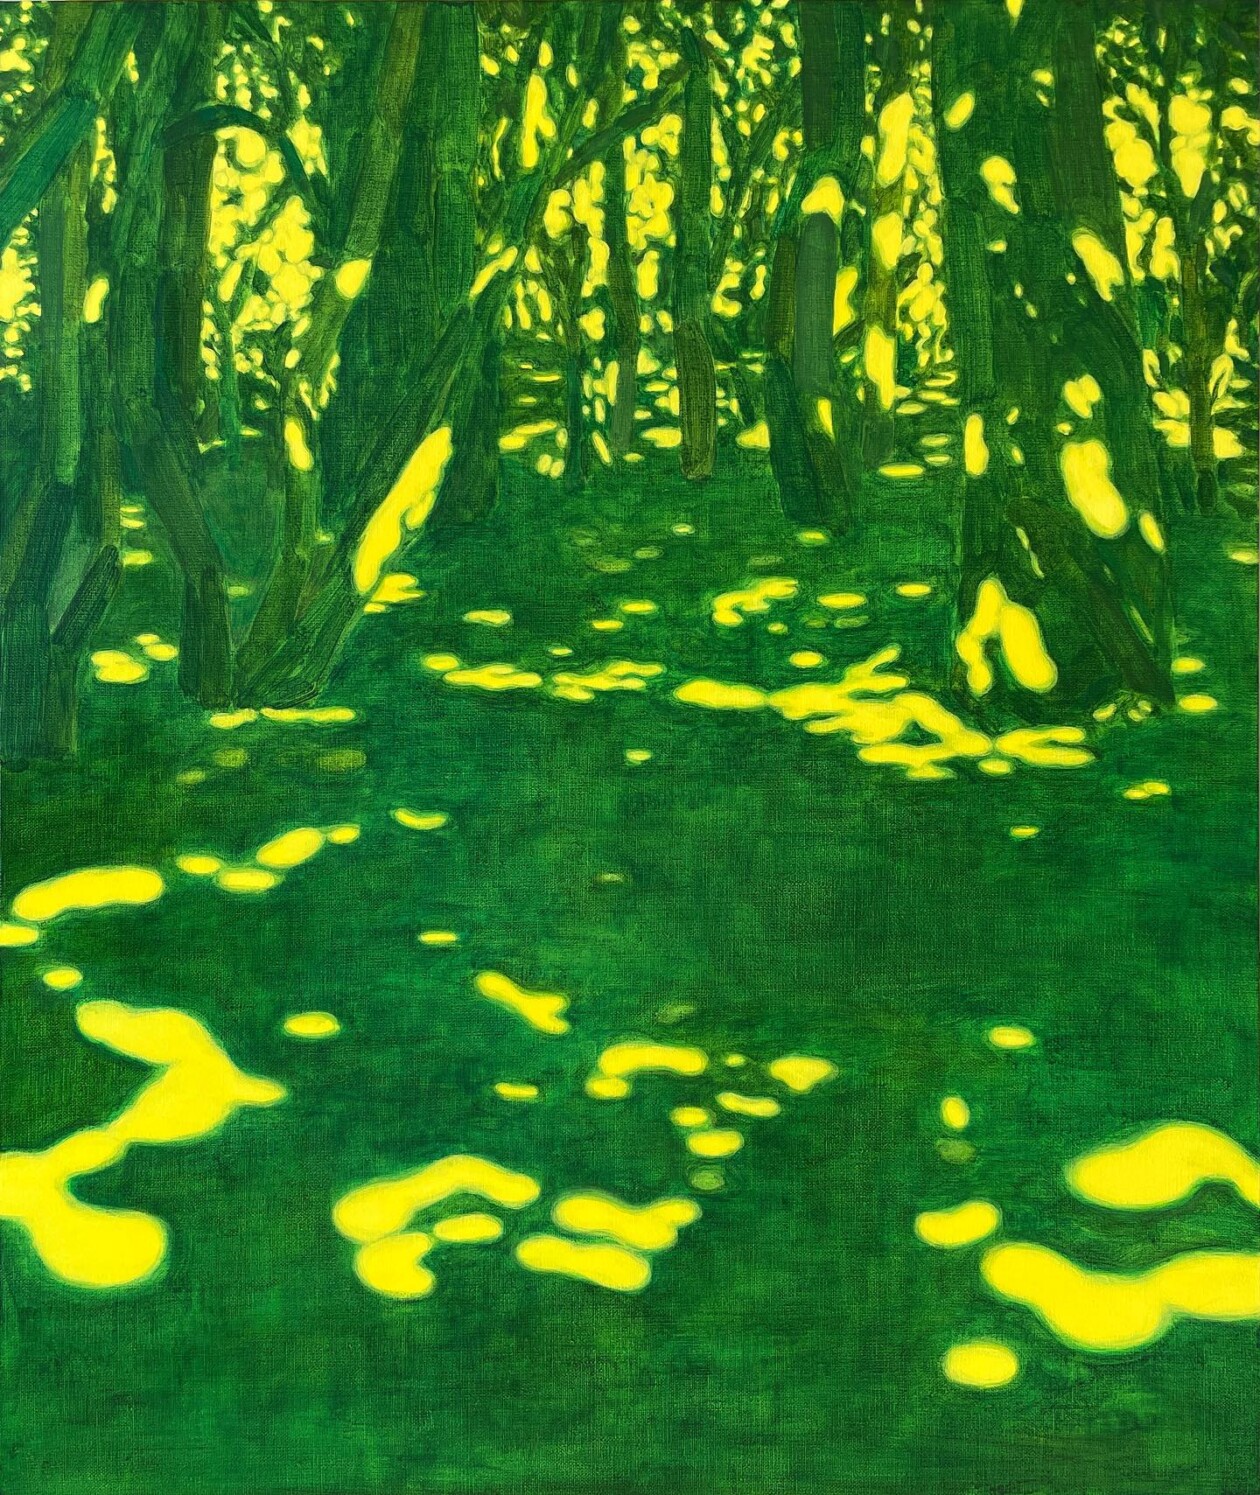 Paintings Of Lights And Shadows By Duri Baek (11)